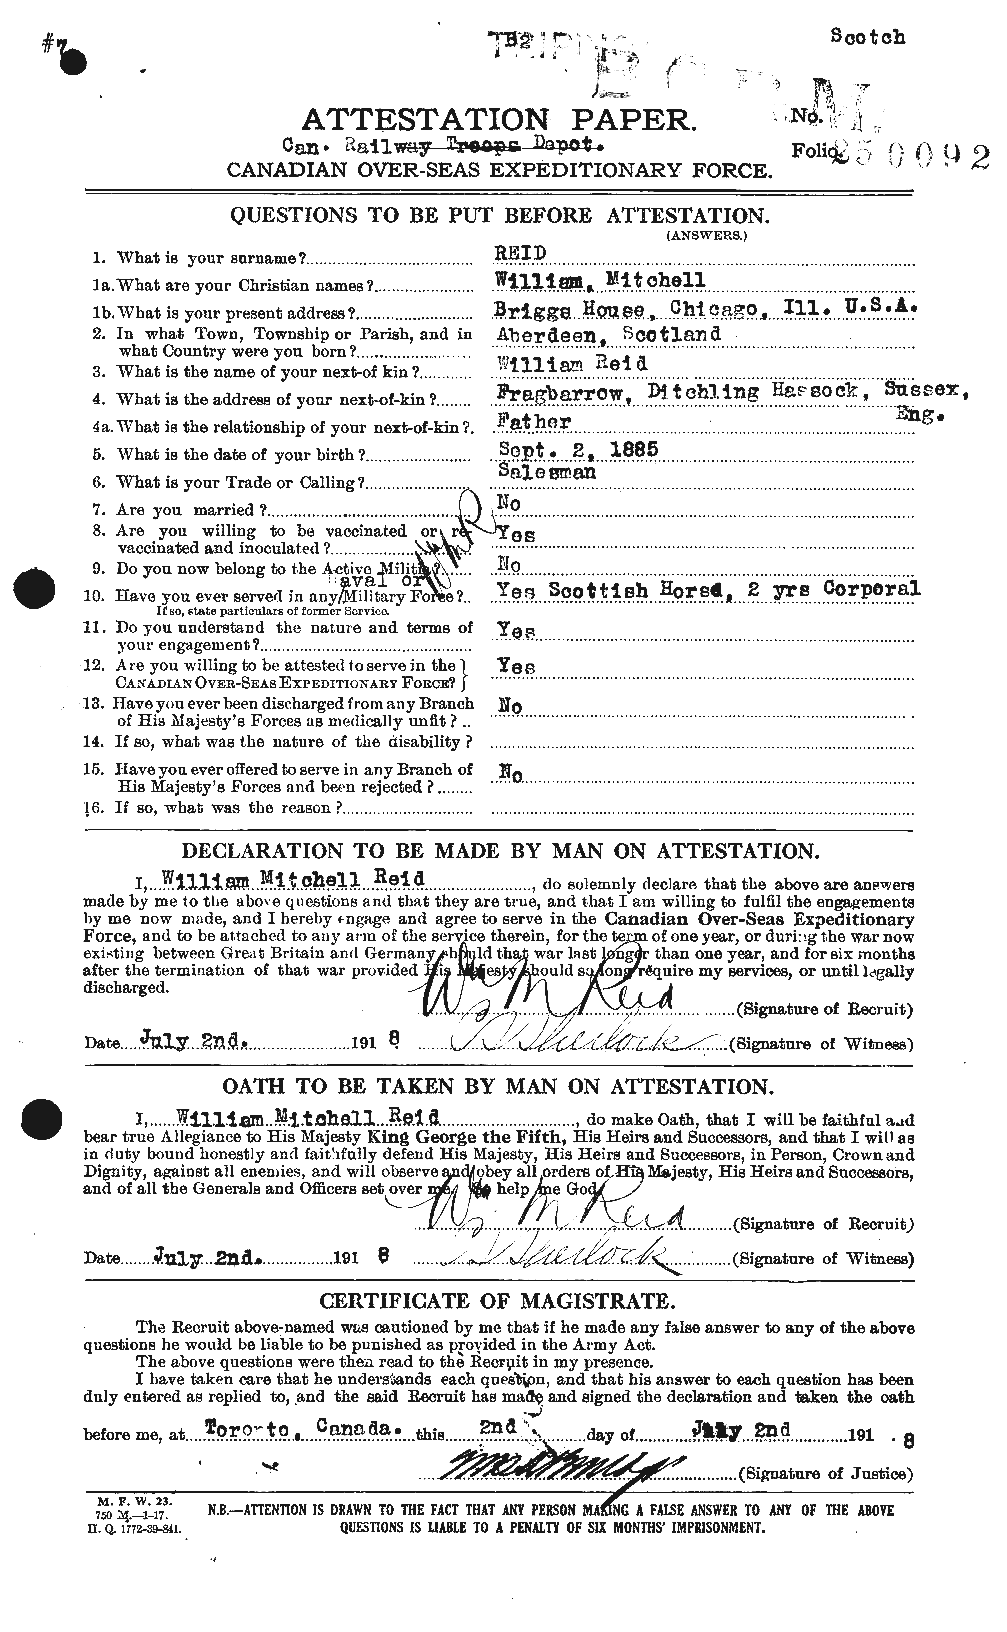 Personnel Records of the First World War - CEF 597026a